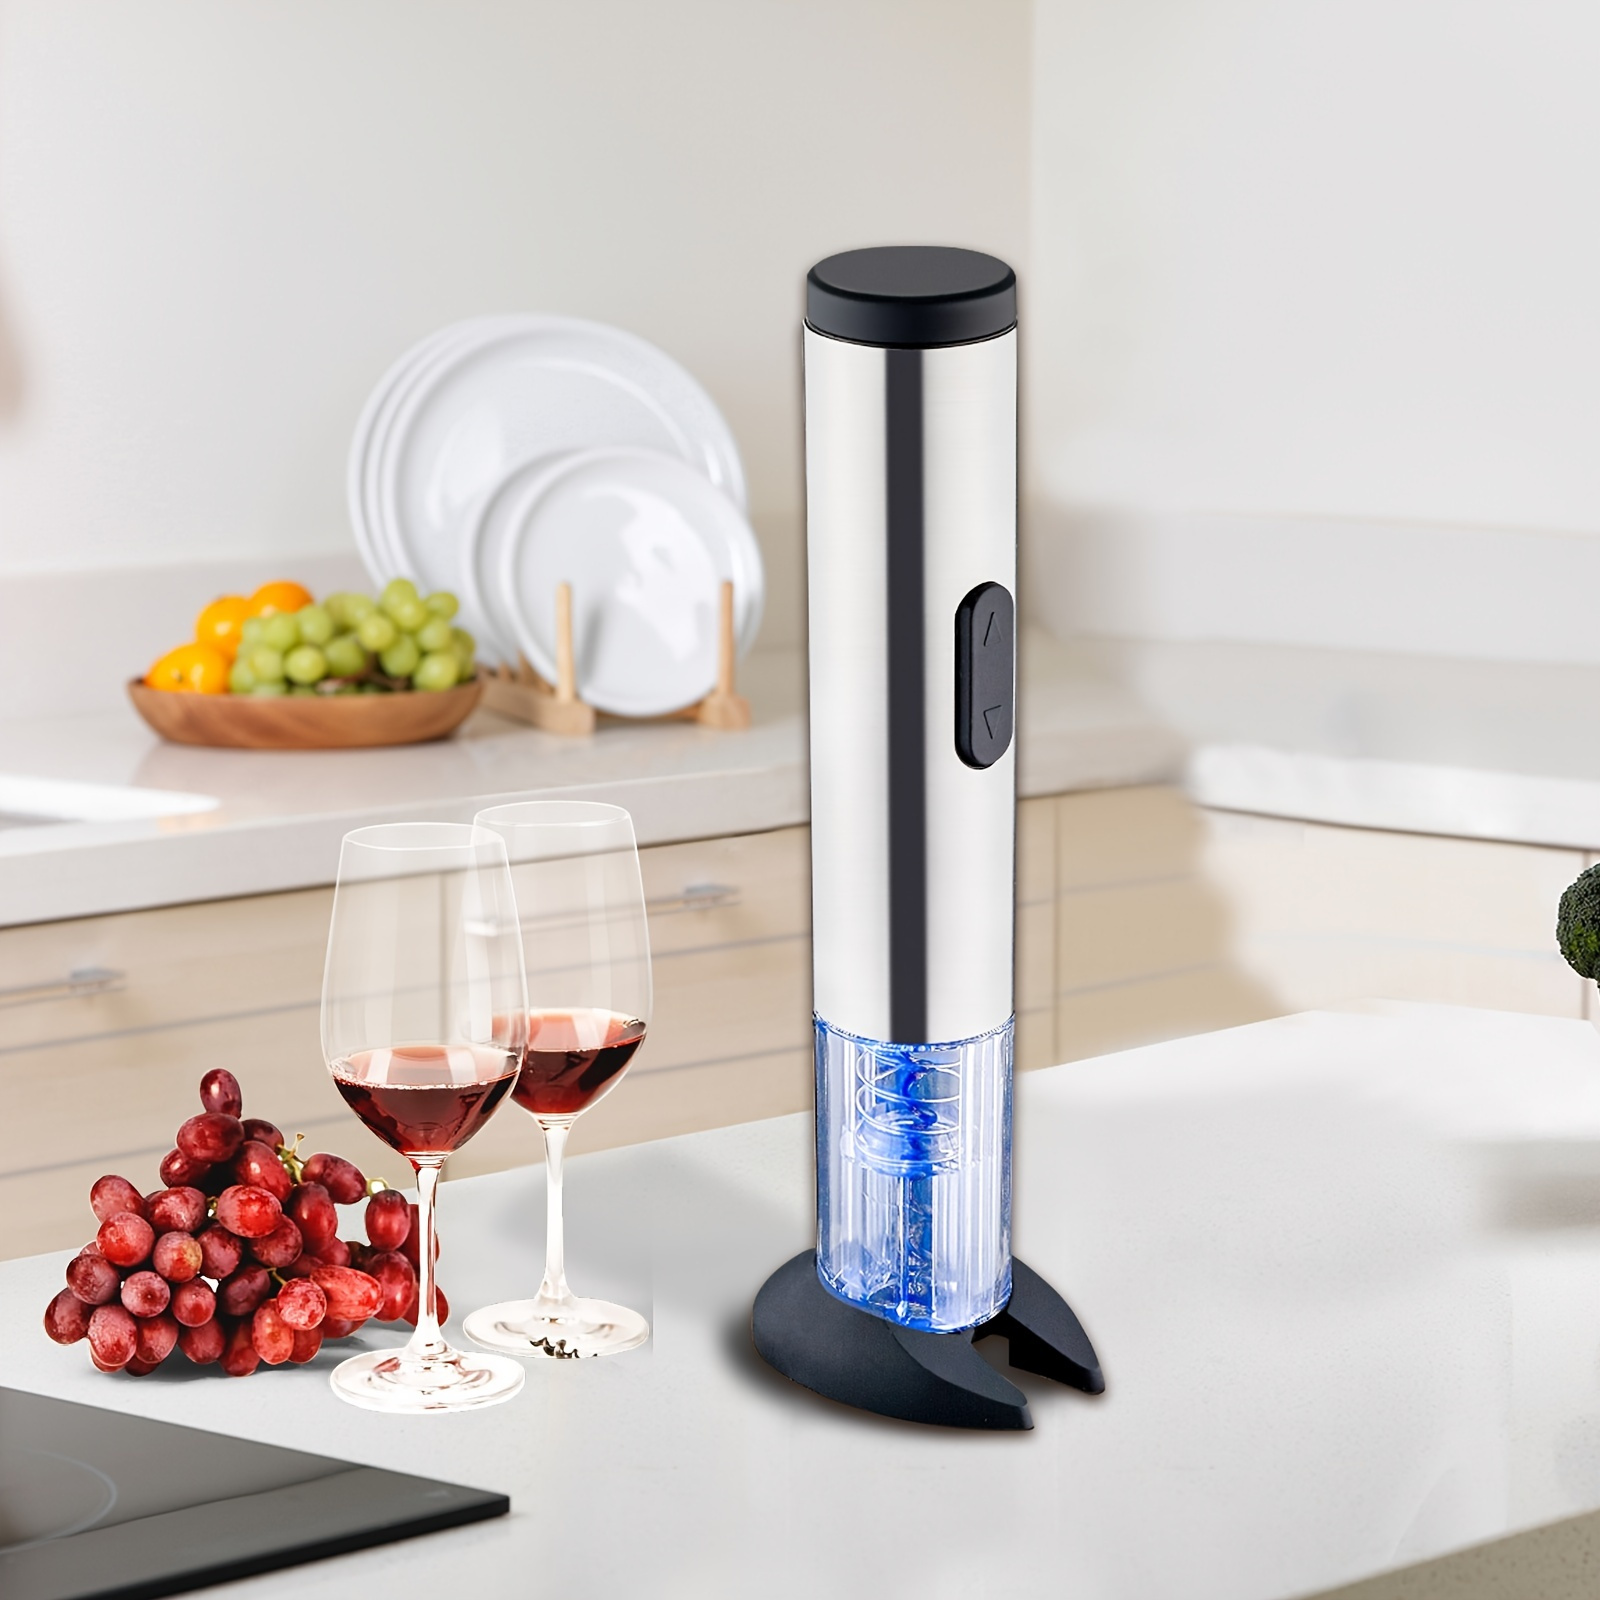 Bits And Pieces multifunctional corkscrew wine opener - all-in-one